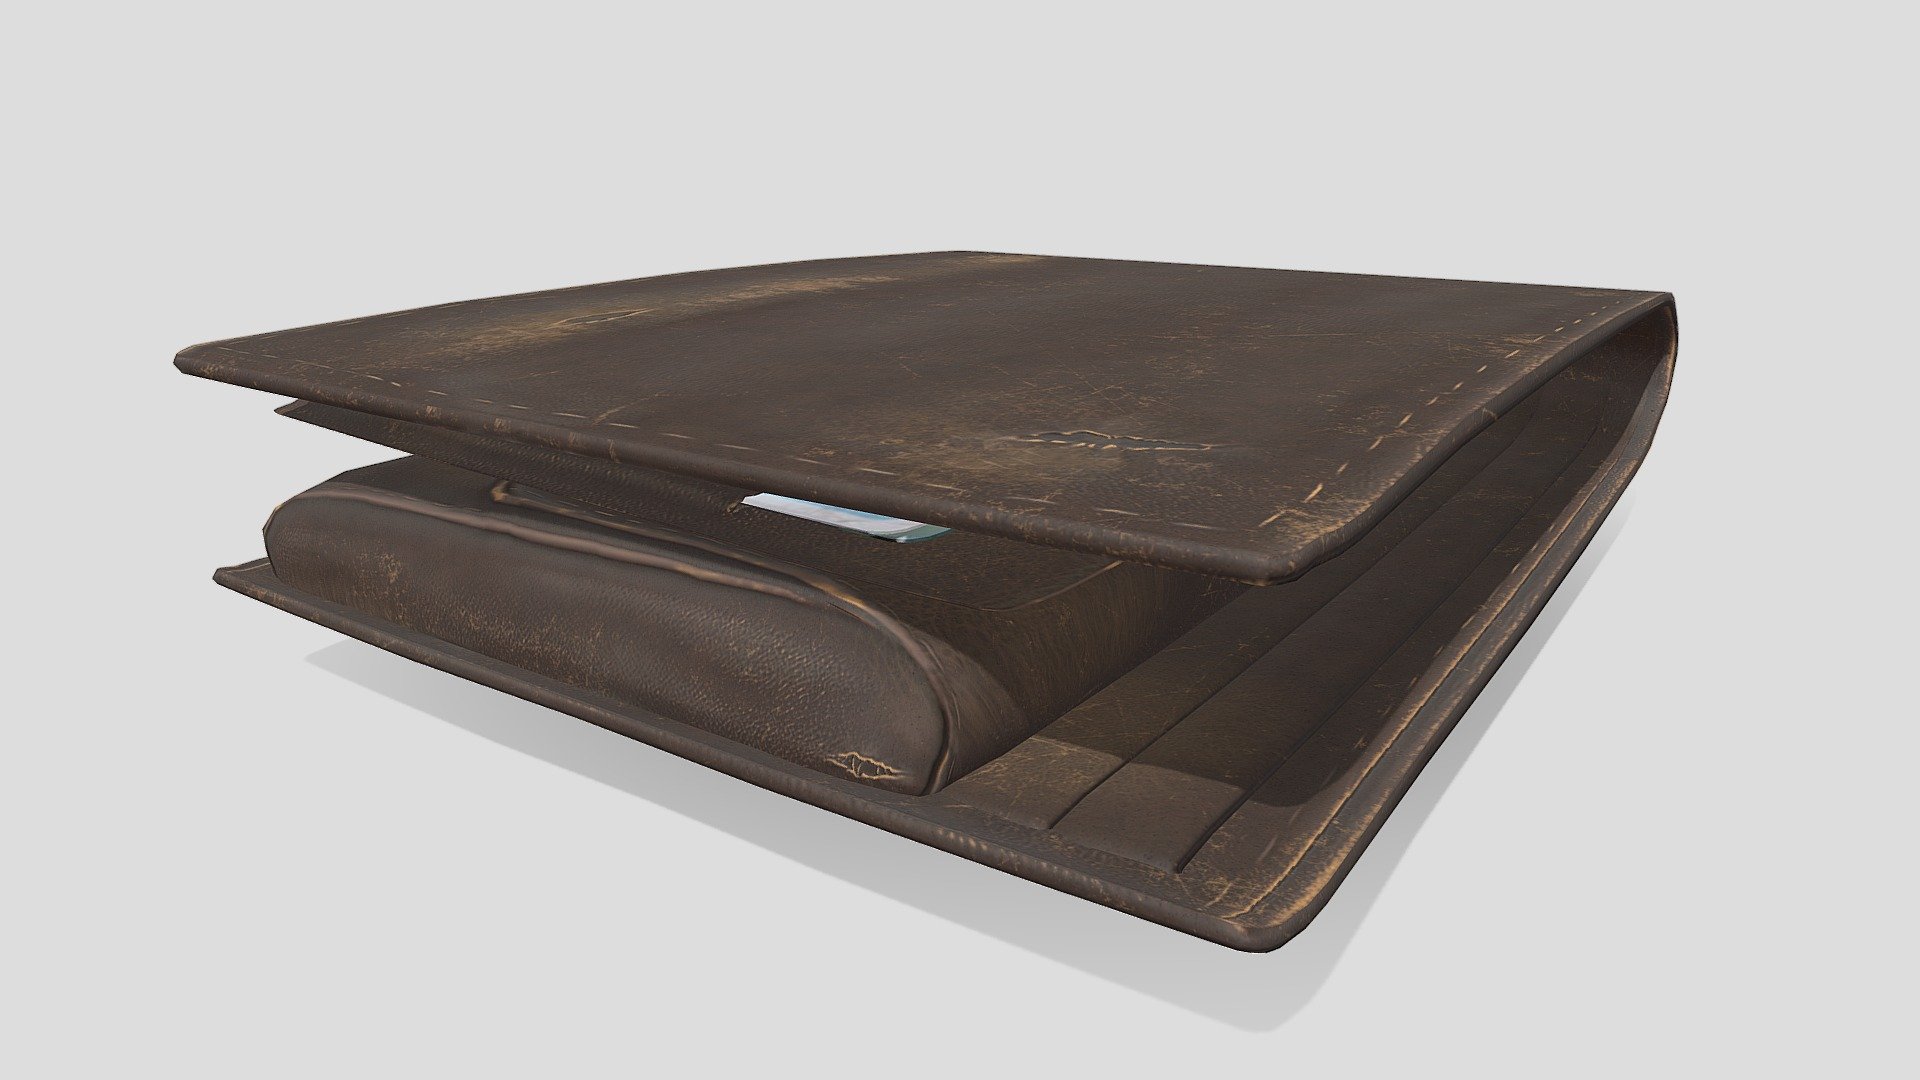 This 3D Wallet model was created based on real life images with implementation. This model is perfect for both Games and CG.

Model formats:

OBJ
FBX

Texture Files: (PNG)

4096 Diffuse Map Texture
4096 Normal Map Texture
4096 Roughness Map Texture
4096 Ambient Occlusion Map Texture 
4096 Metalness Map Texture

Textures made with Photoshop, Zbrush and Substance Painter. 

Please like, comment and follow!

P.S - The model will be available for download/buy shortly 3d model